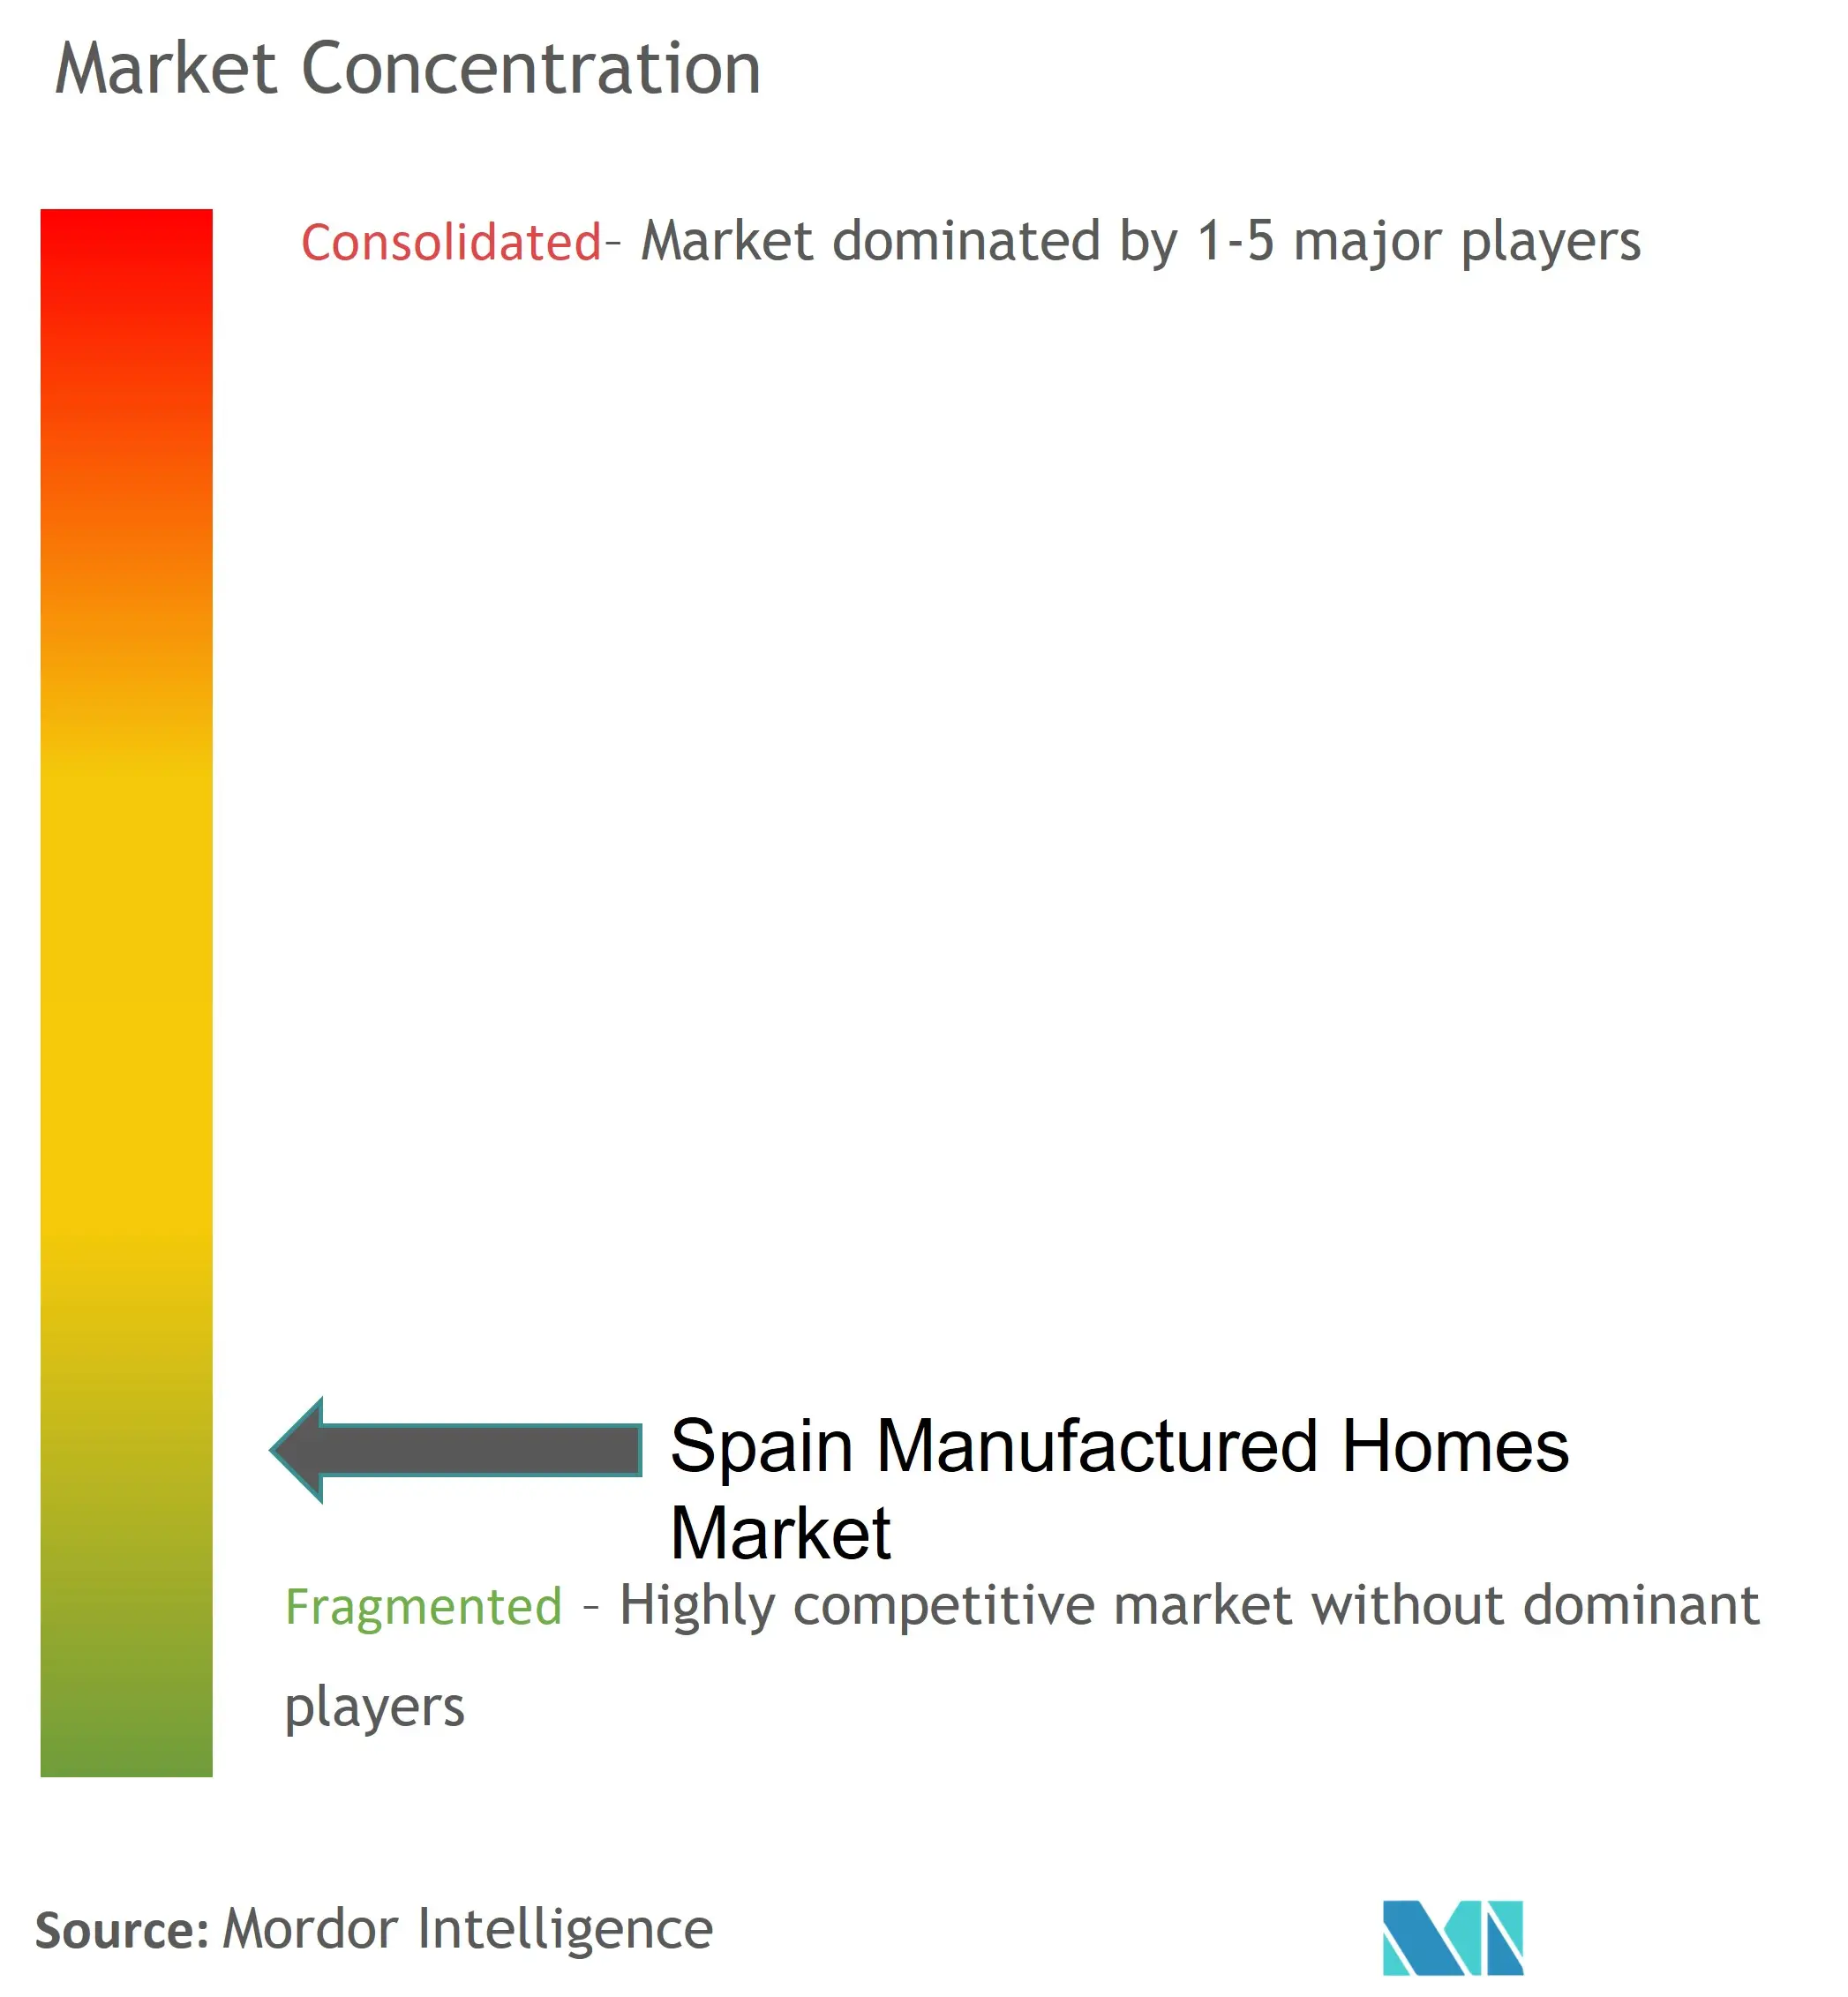 Spain Manufactured Homes Market Concentration